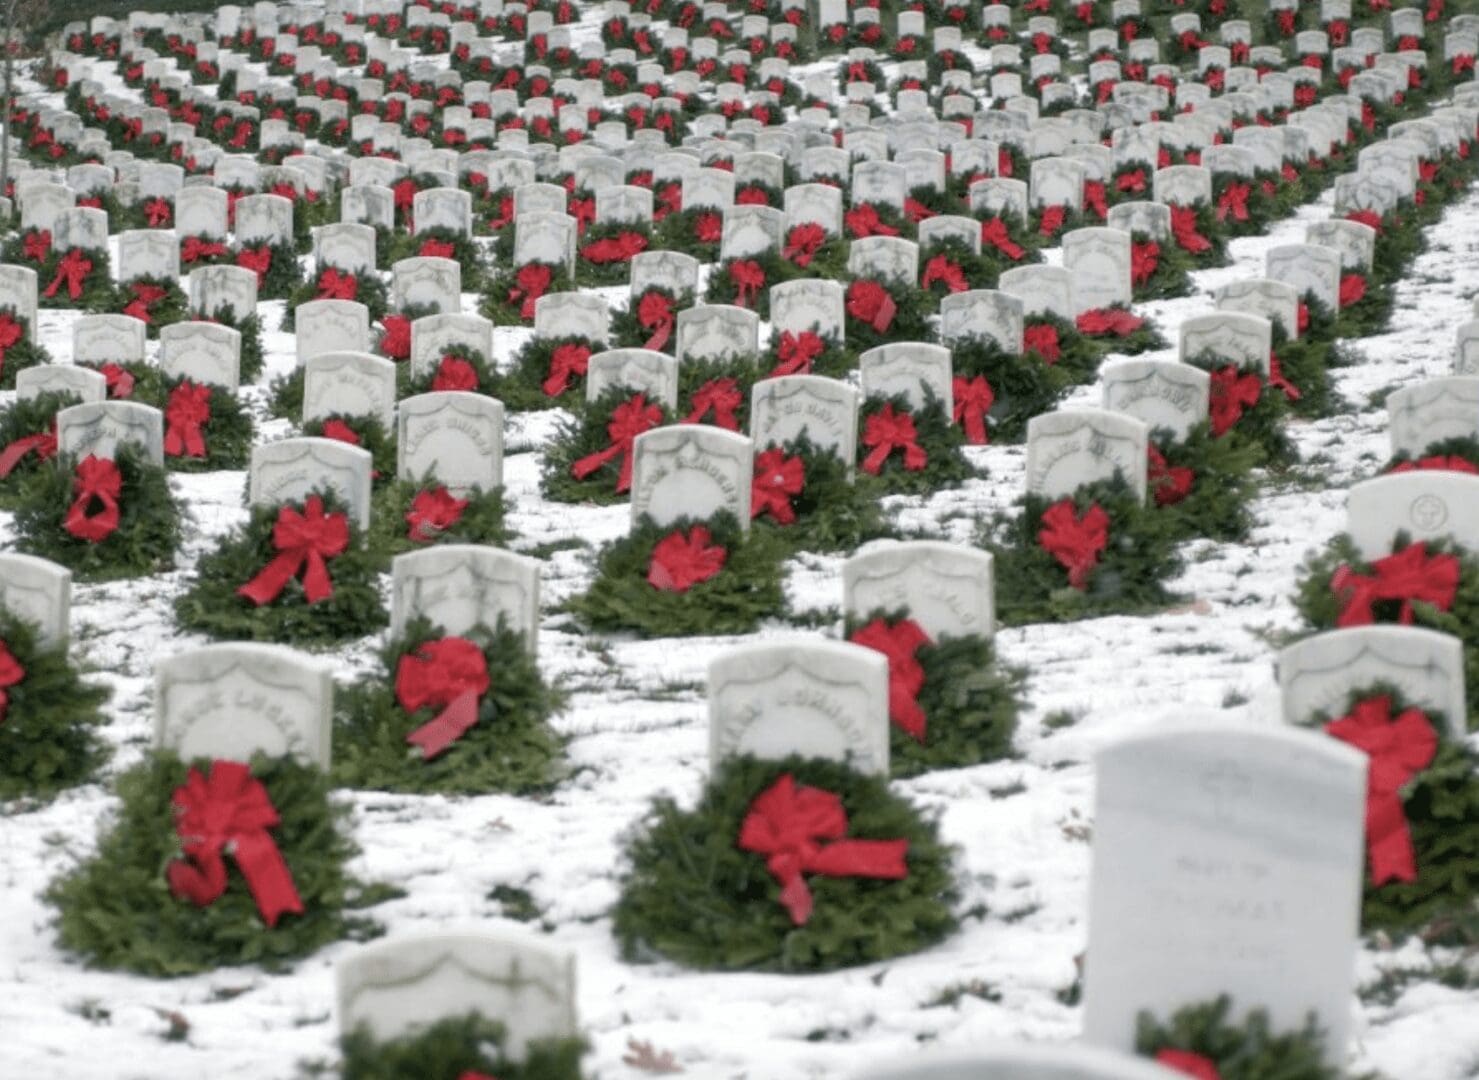 A group of headstones with red bows in the snow.